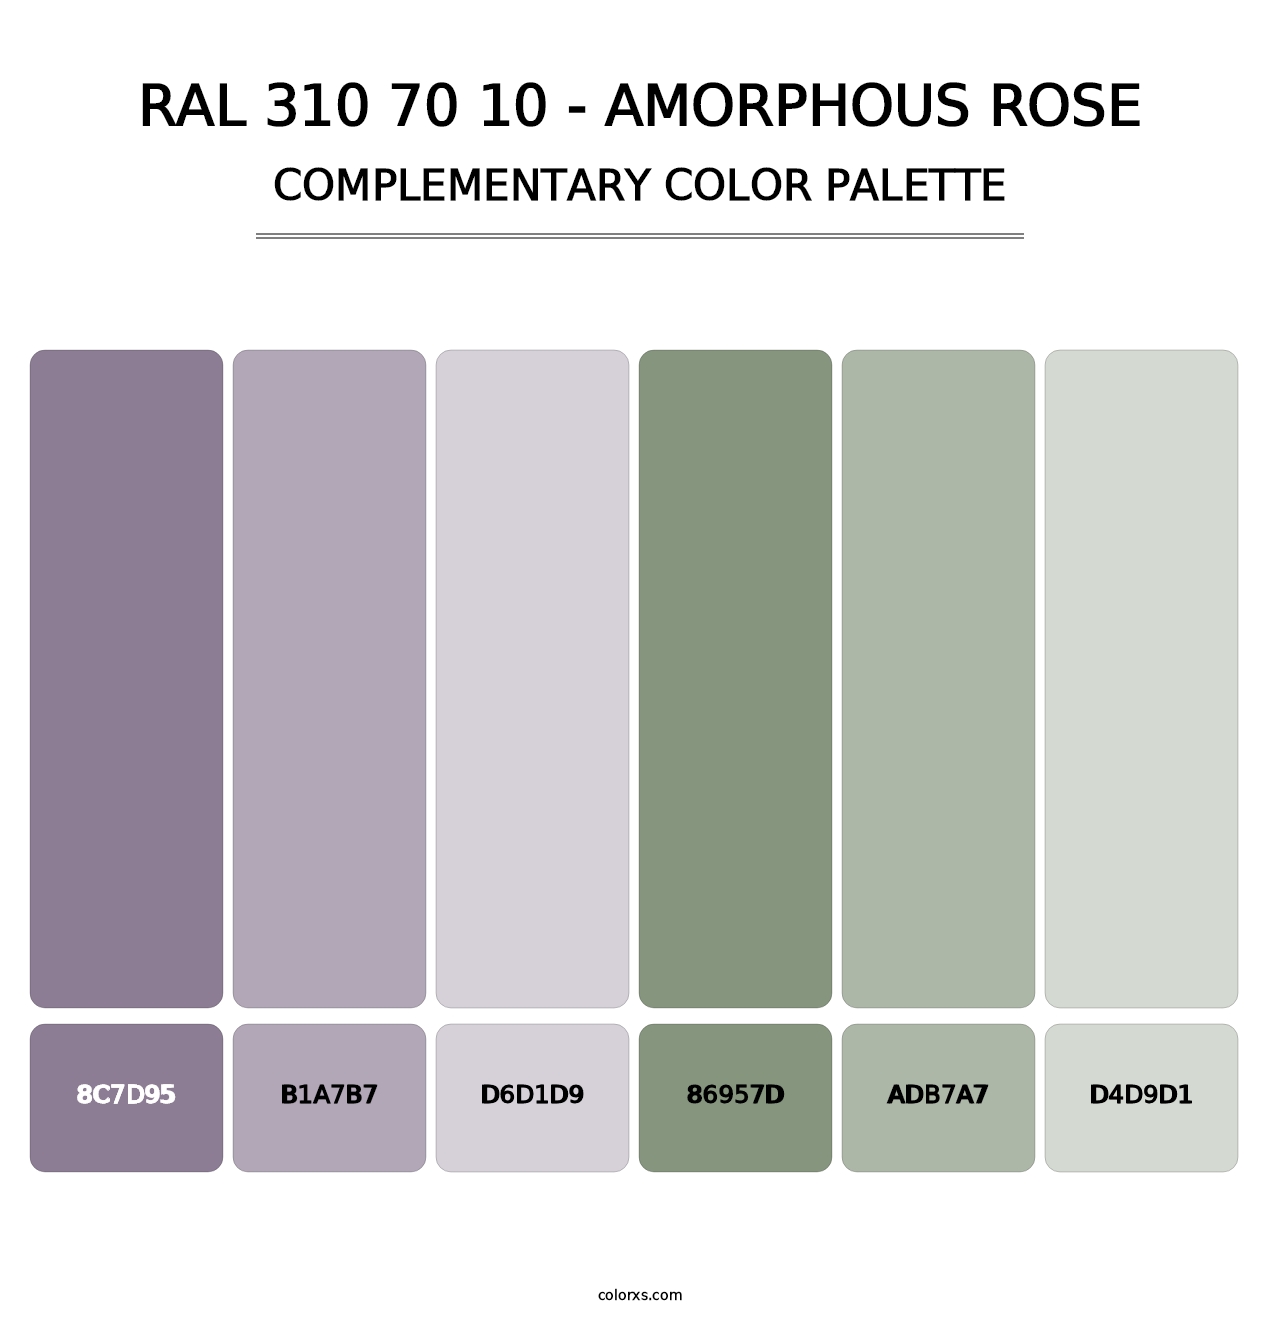 RAL 310 70 10 - Amorphous Rose - Complementary Color Palette